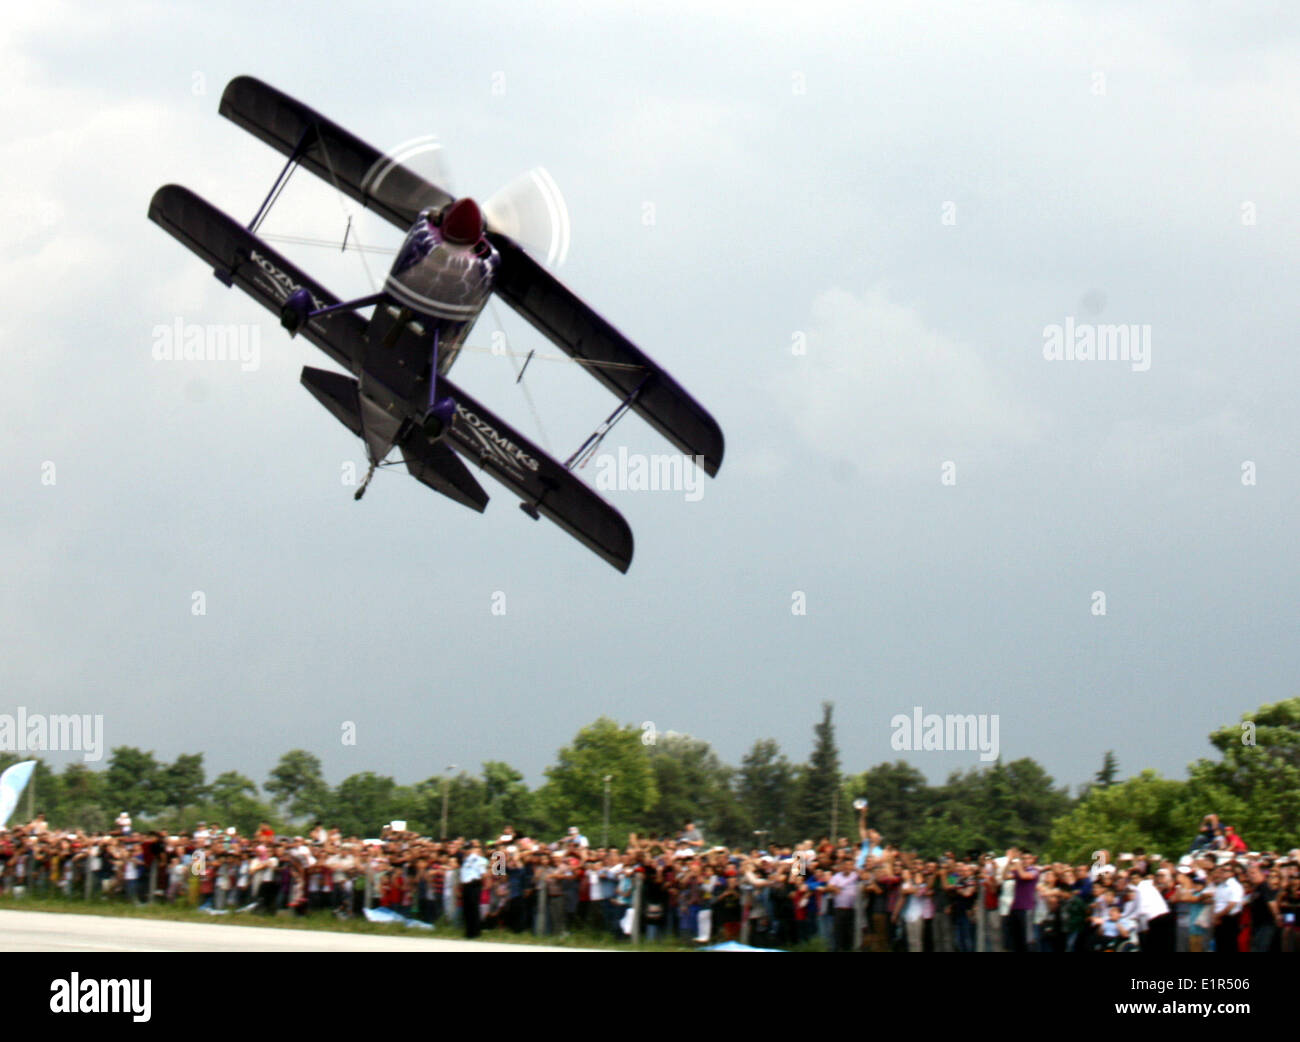 Istanbul, Turkey. 9th June, 2014. An aircraft is seen performing during an aerobatic flight show in Bursa, Turkey, on June 9, 2014. Credit:  Xinhua/Alamy Live News Stock Photo